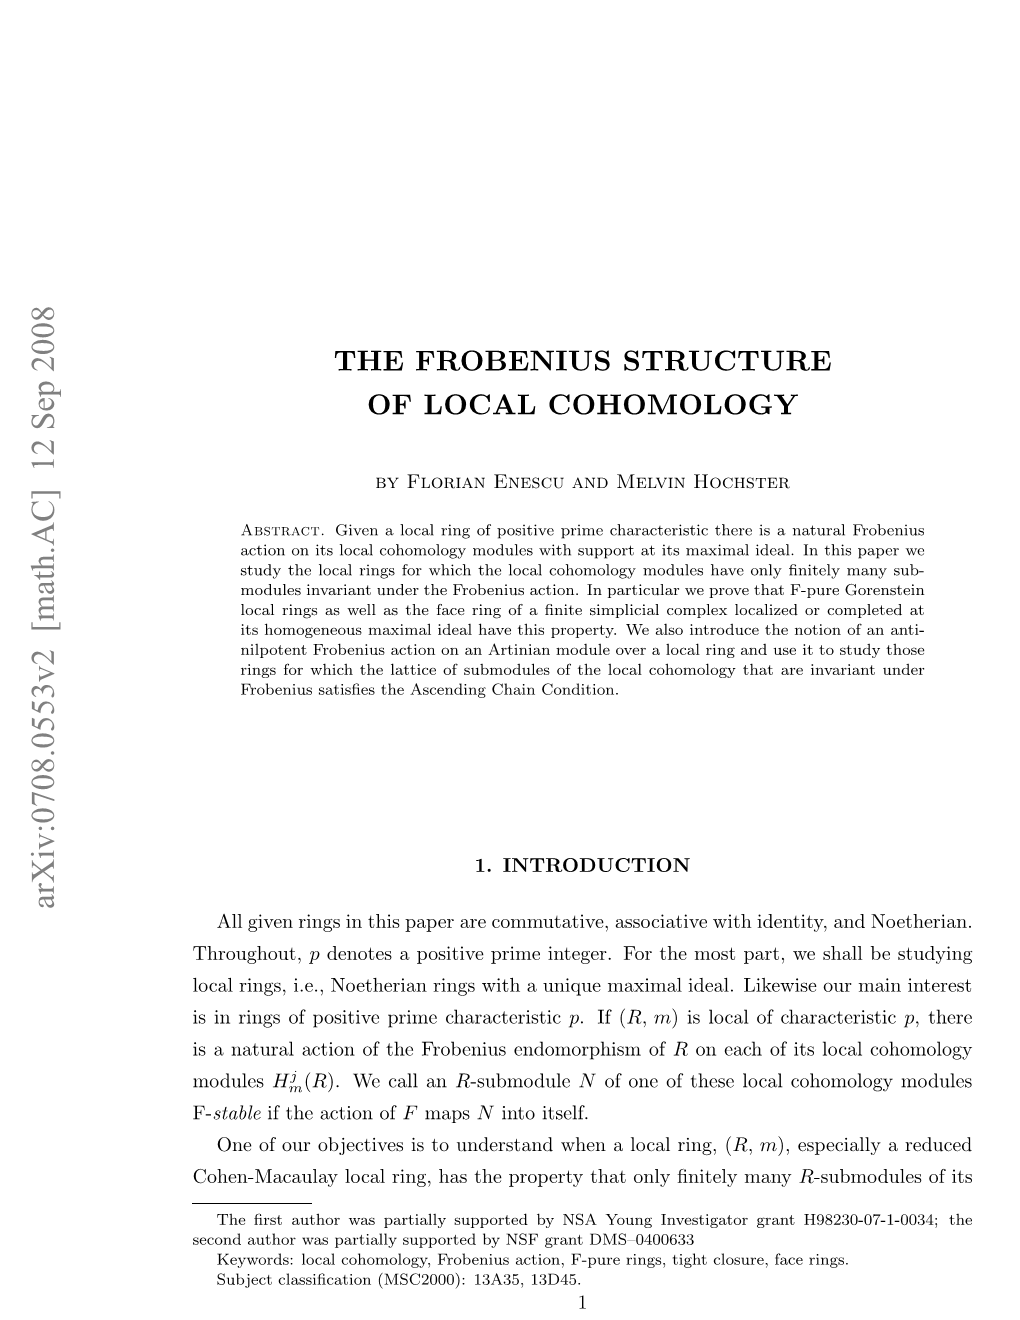 The Frobenius Structure of Local Cohomology 3